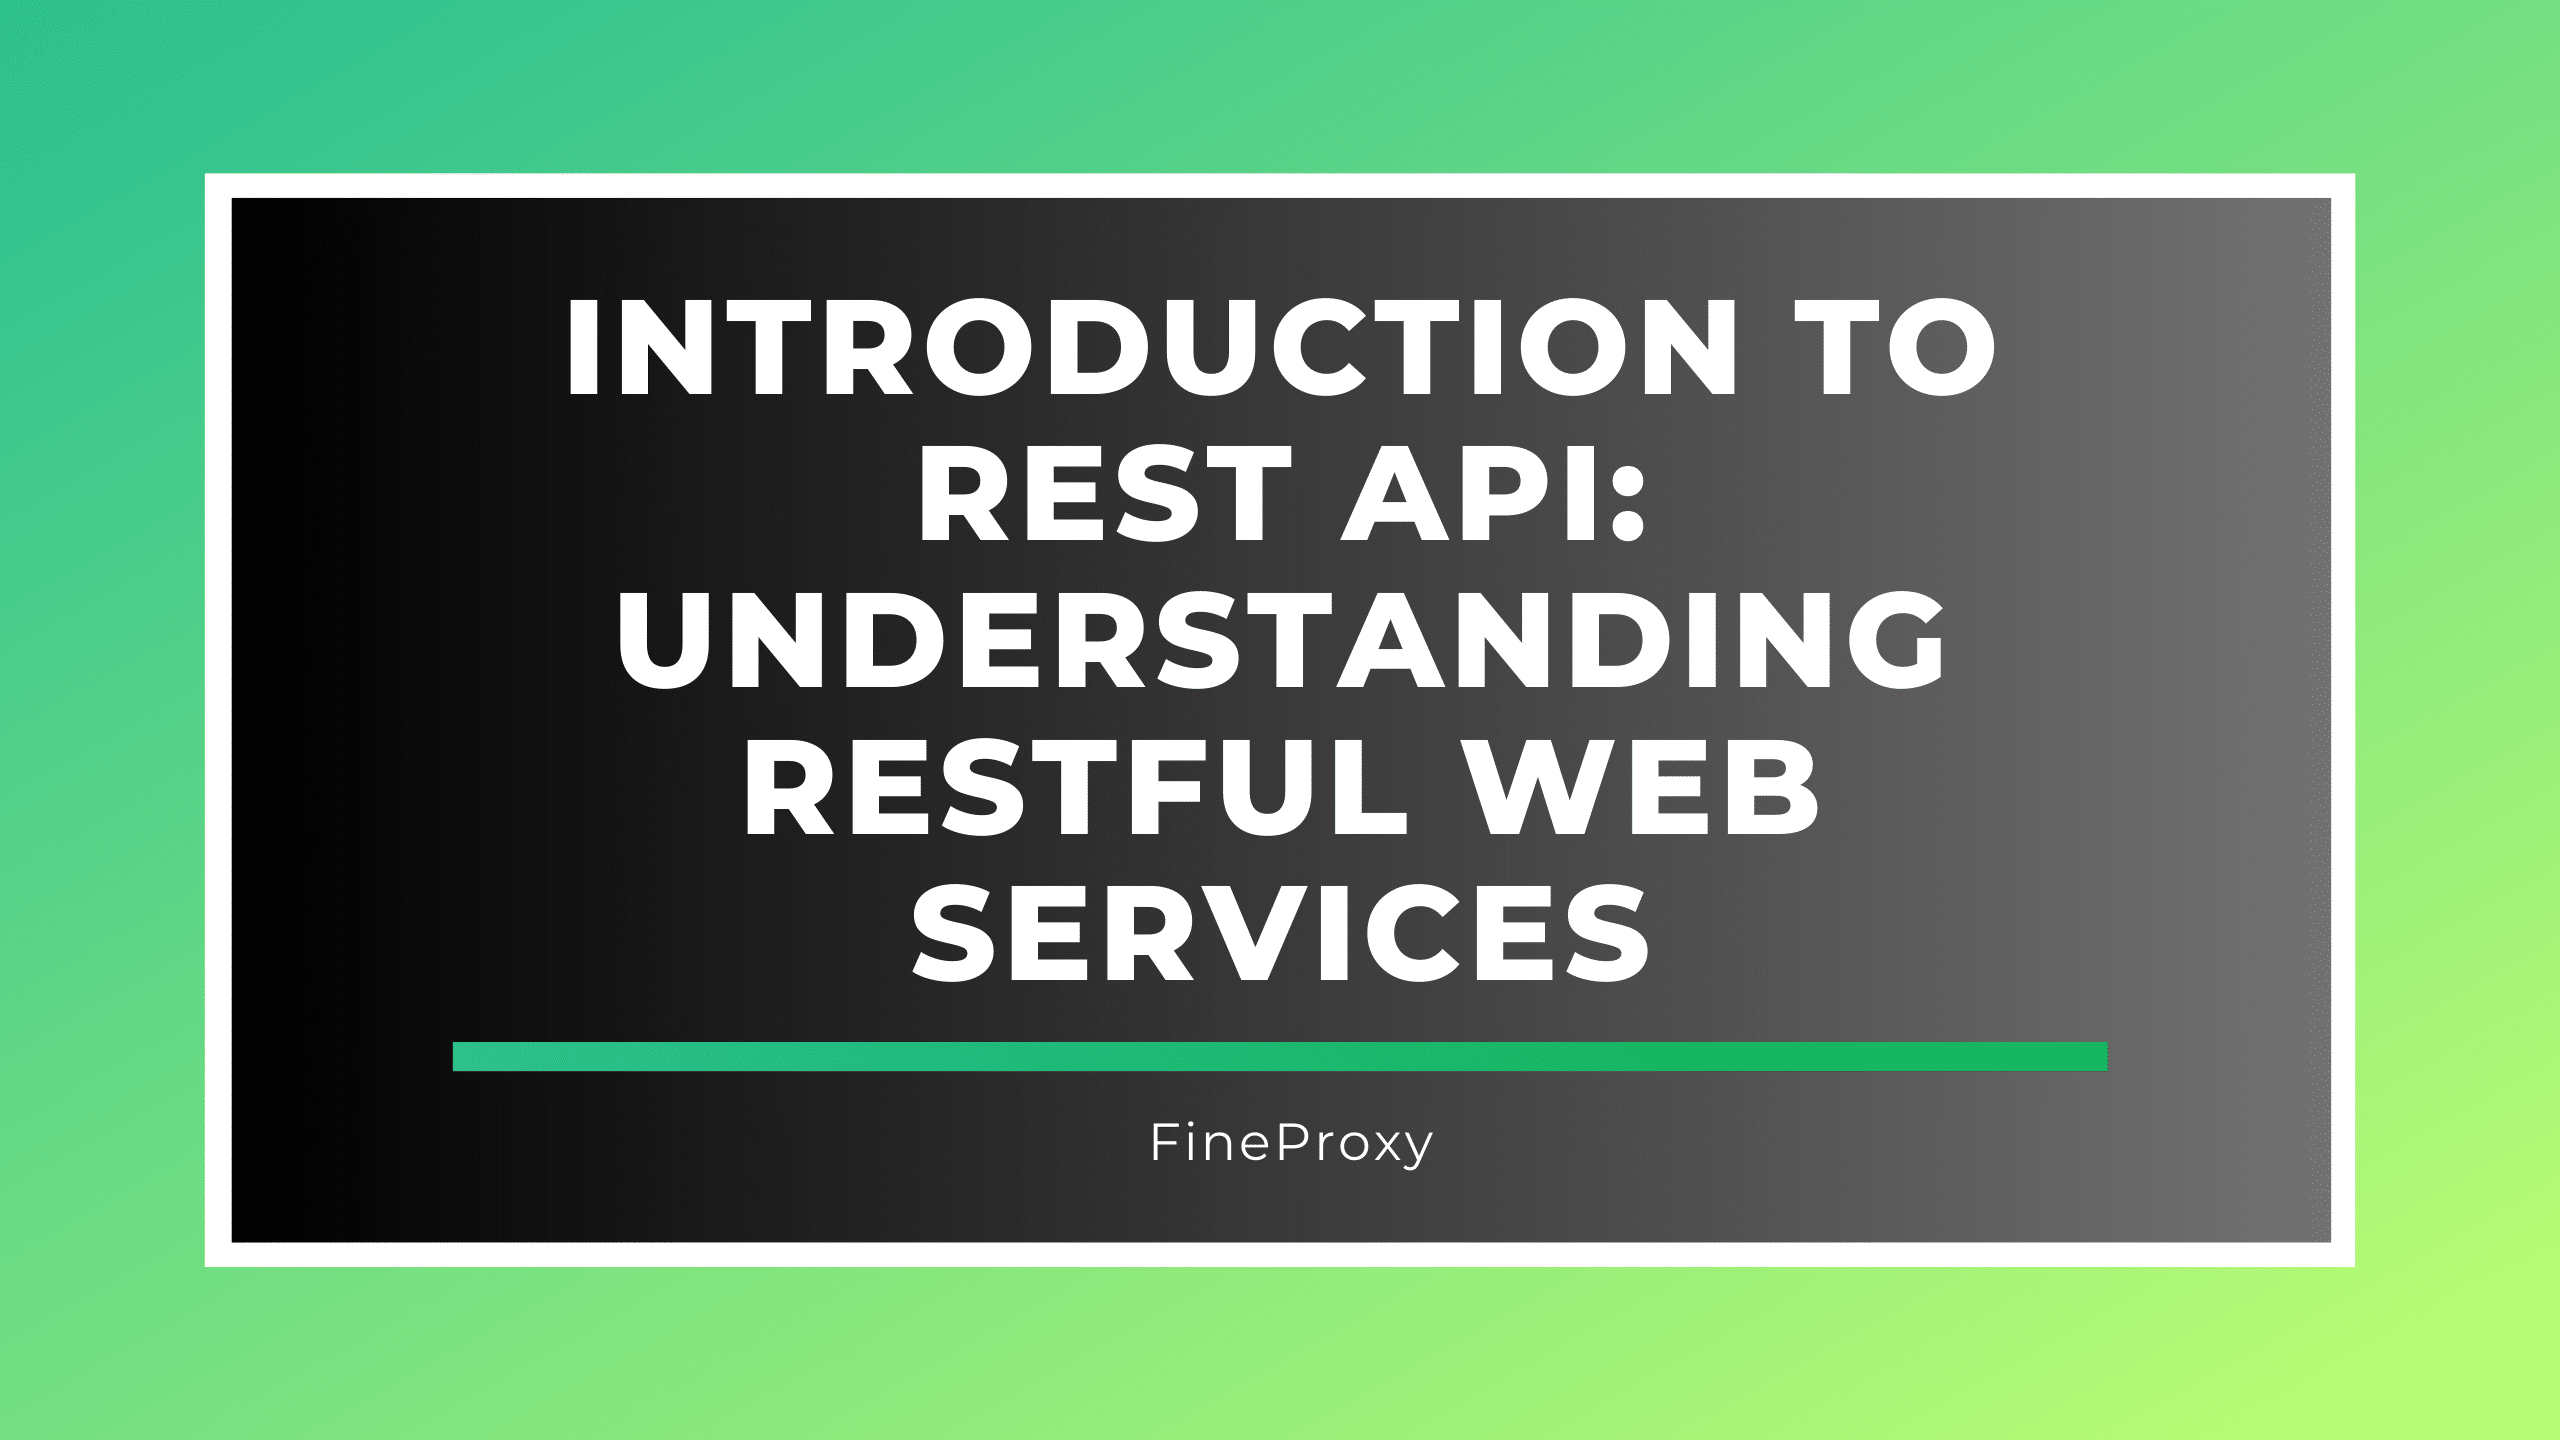 Introduction to REST API: Understanding RESTful Web Services